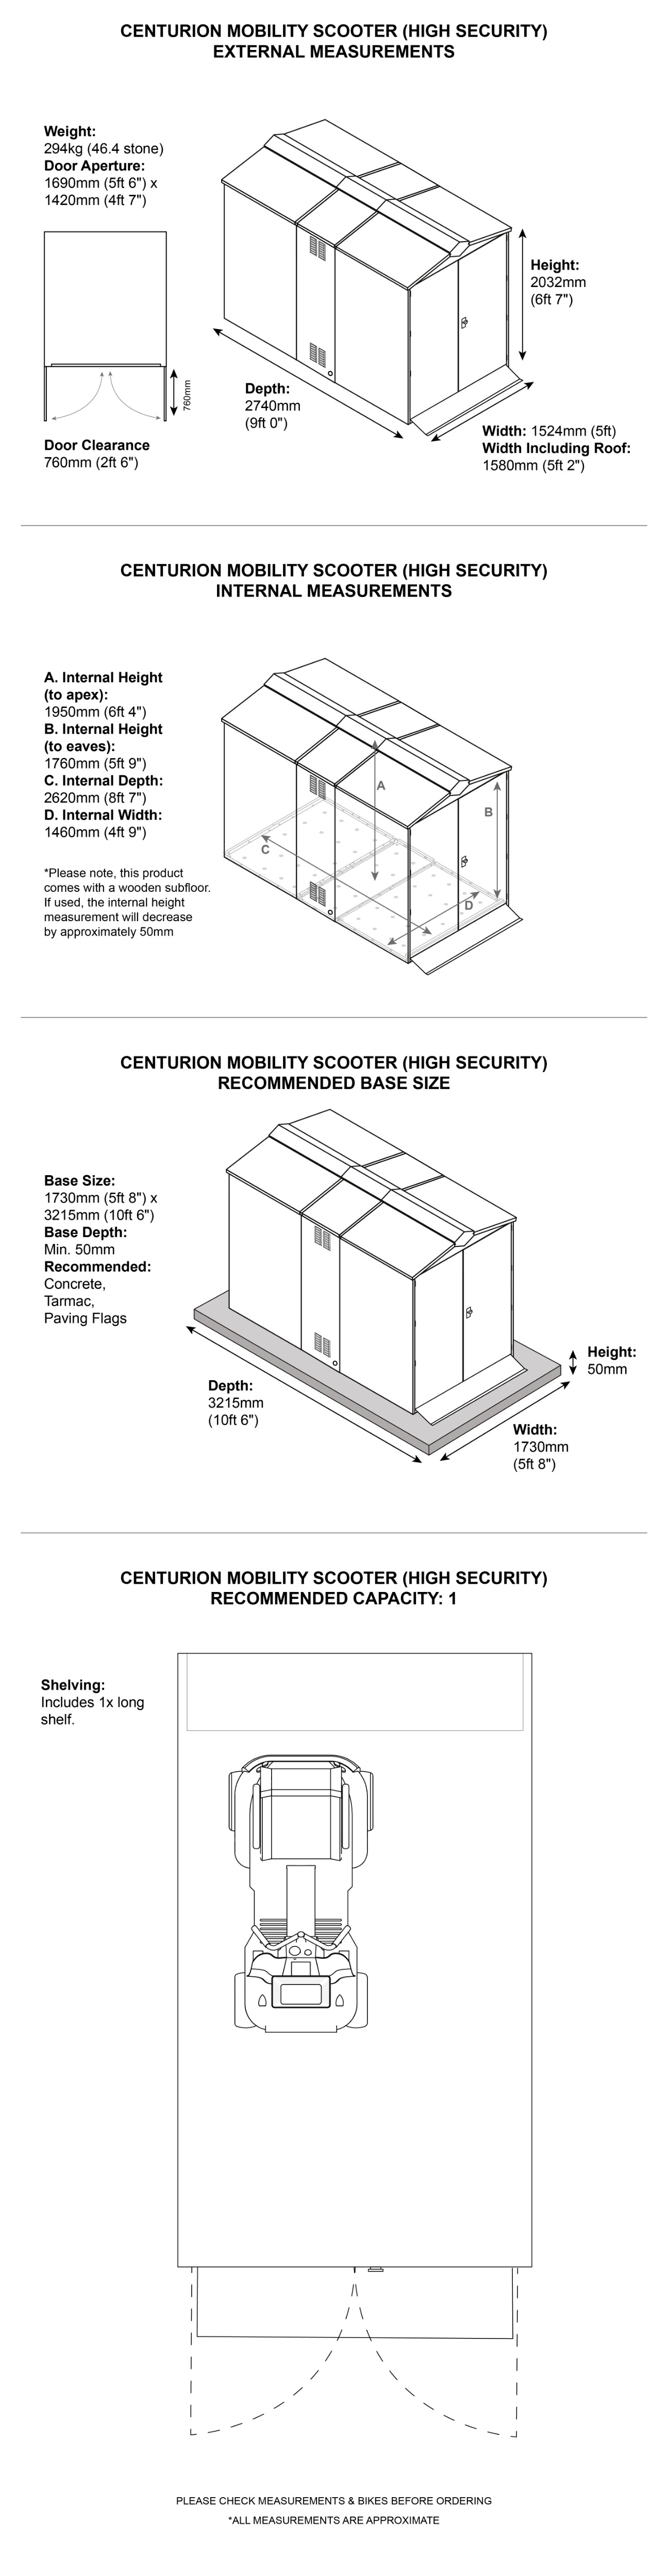 Mobility Scooter Shed dimensions